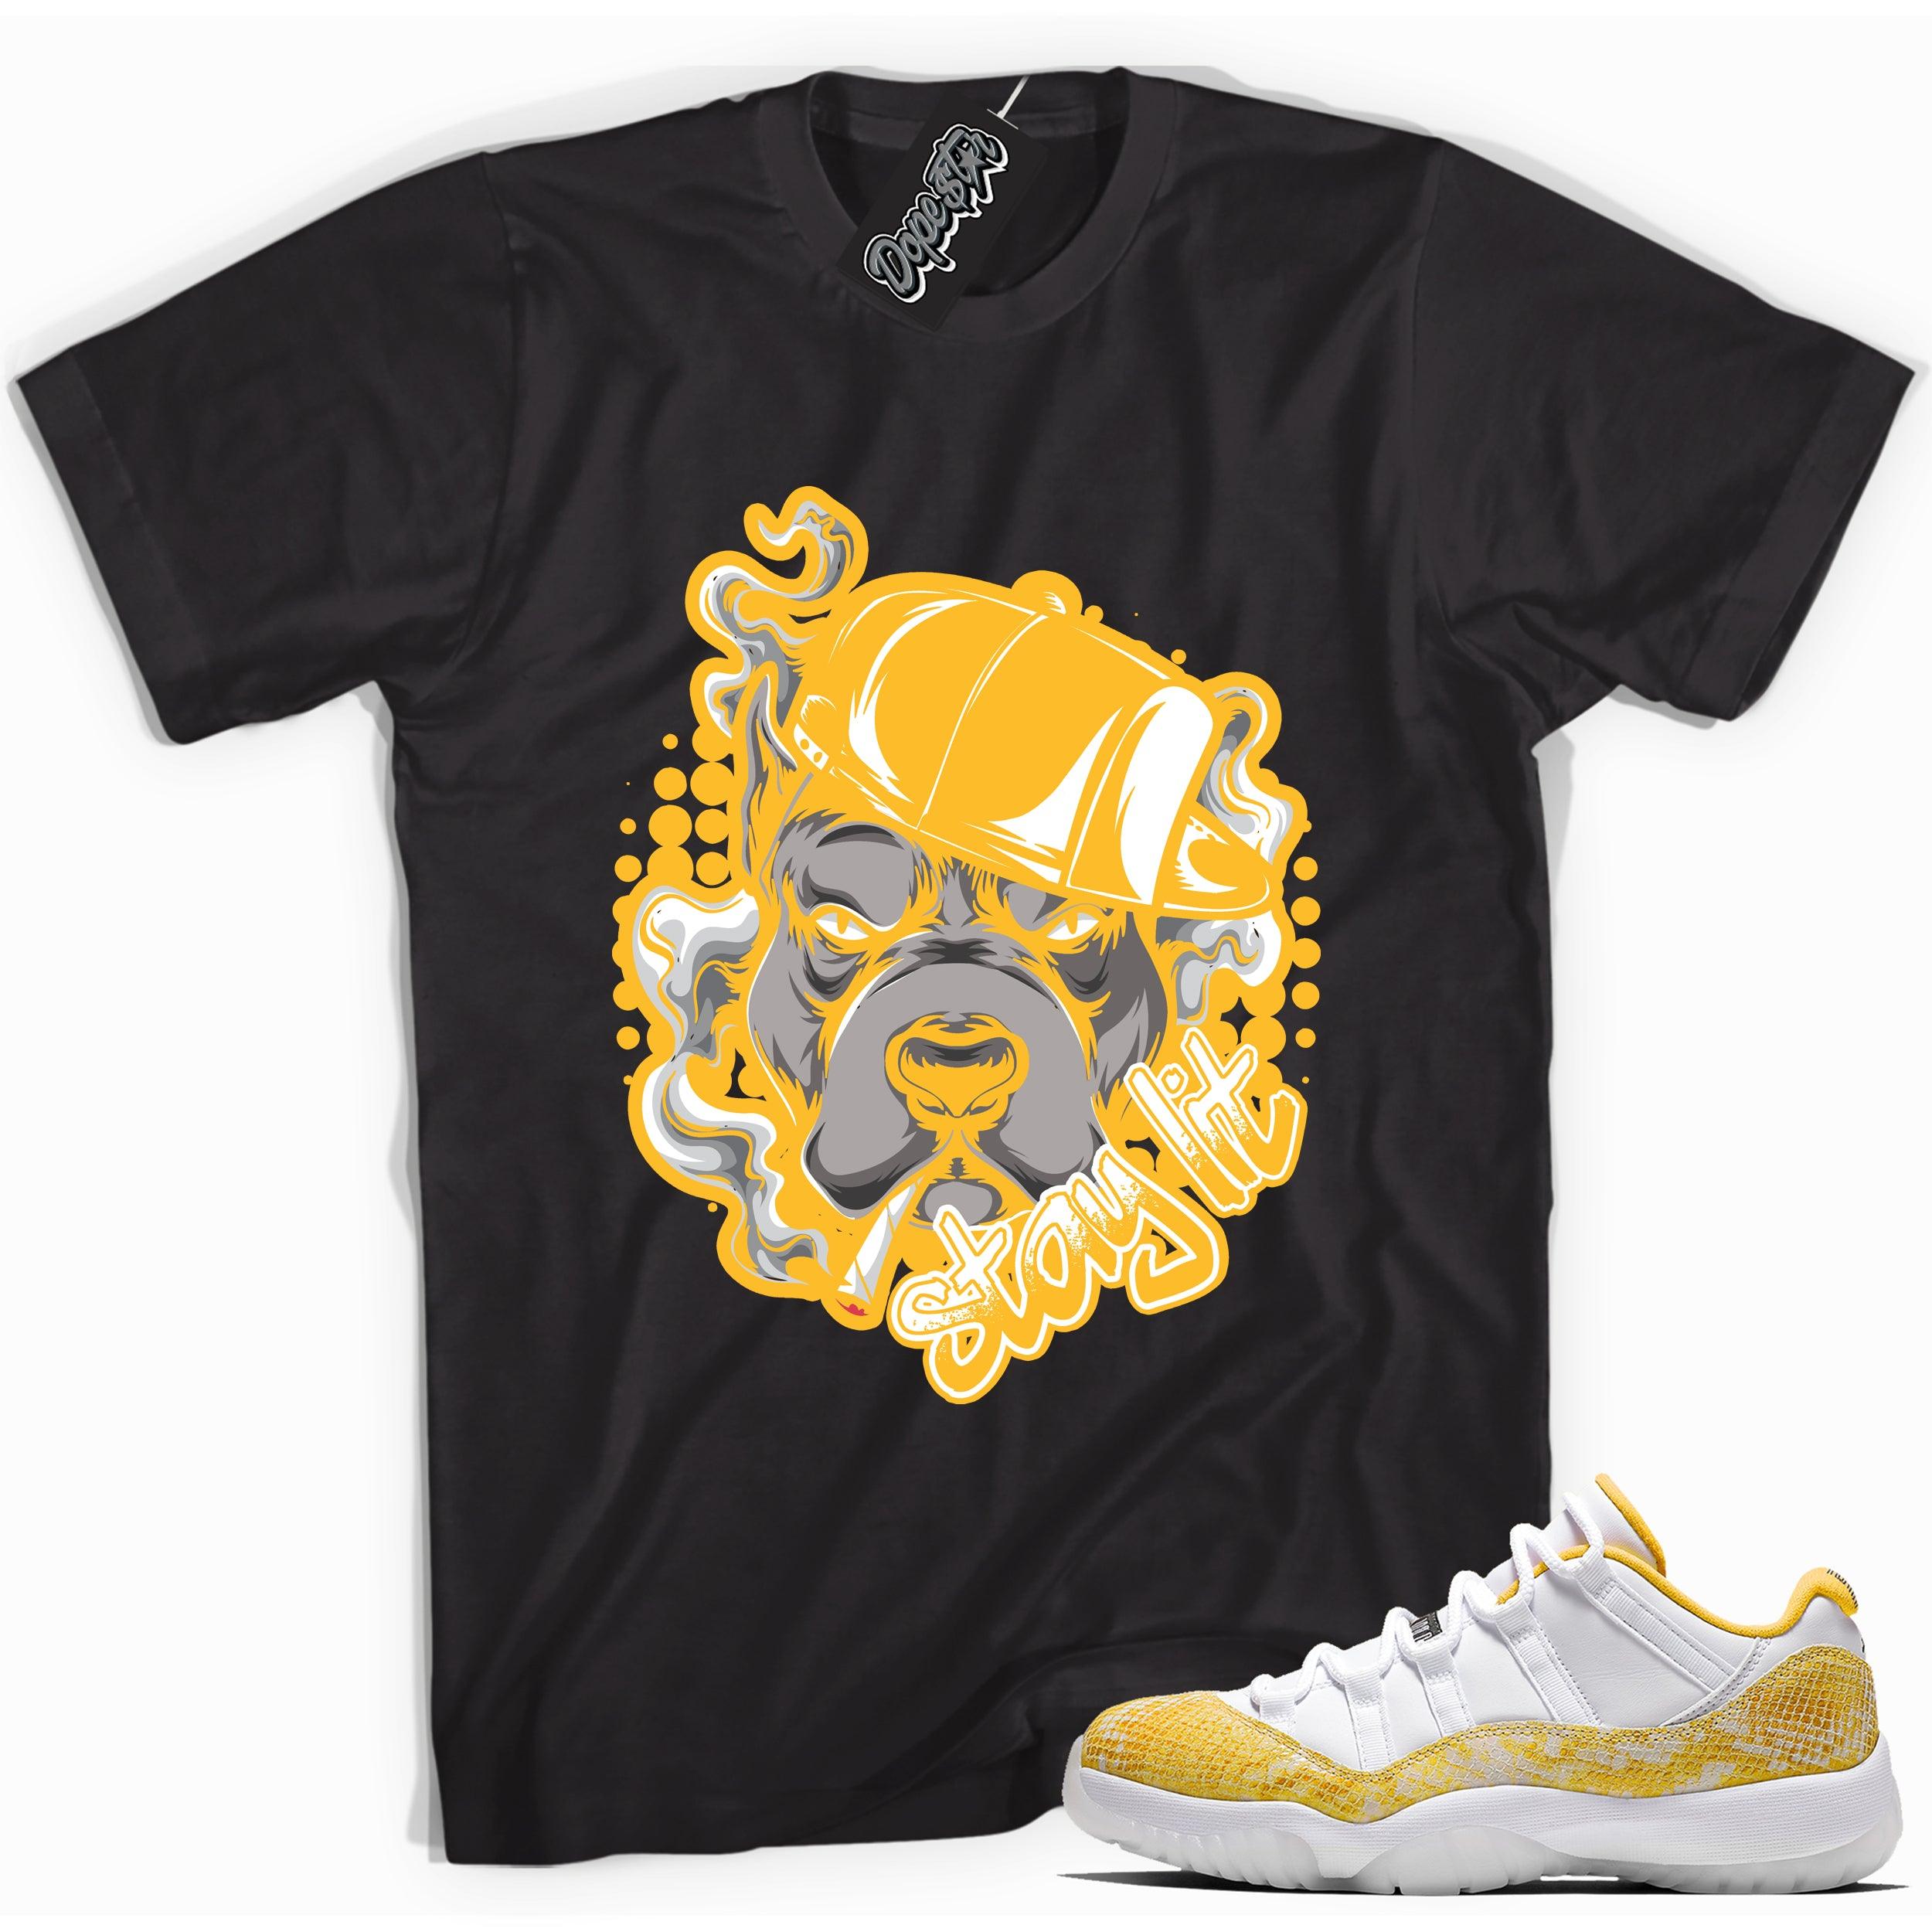 Cool black graphic tee with 'stay lit' print, that perfectly matches  Air Jordan 11 Retro Low Yellow Snakeskin sneakers